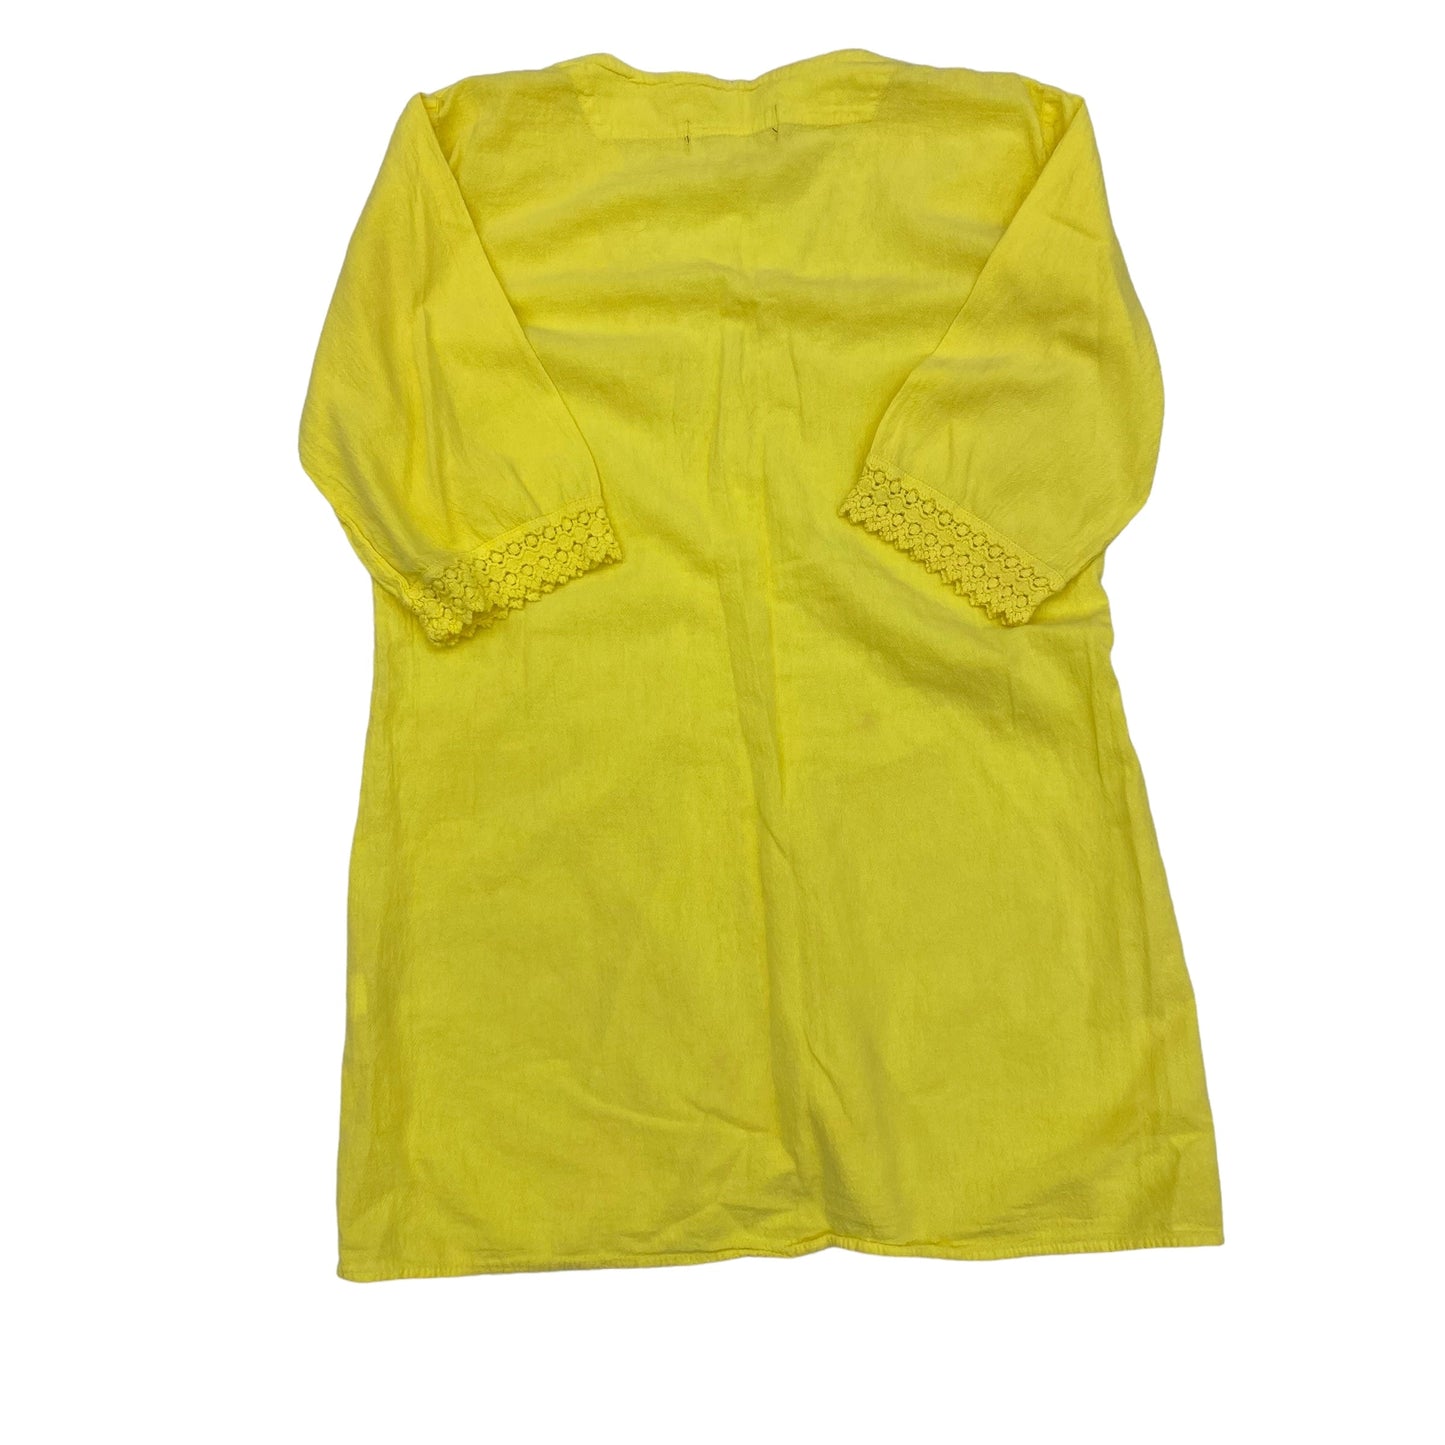 YELLOW    CLOTHES MENTOR TUNIC 3/4 SLEEVE, Size M